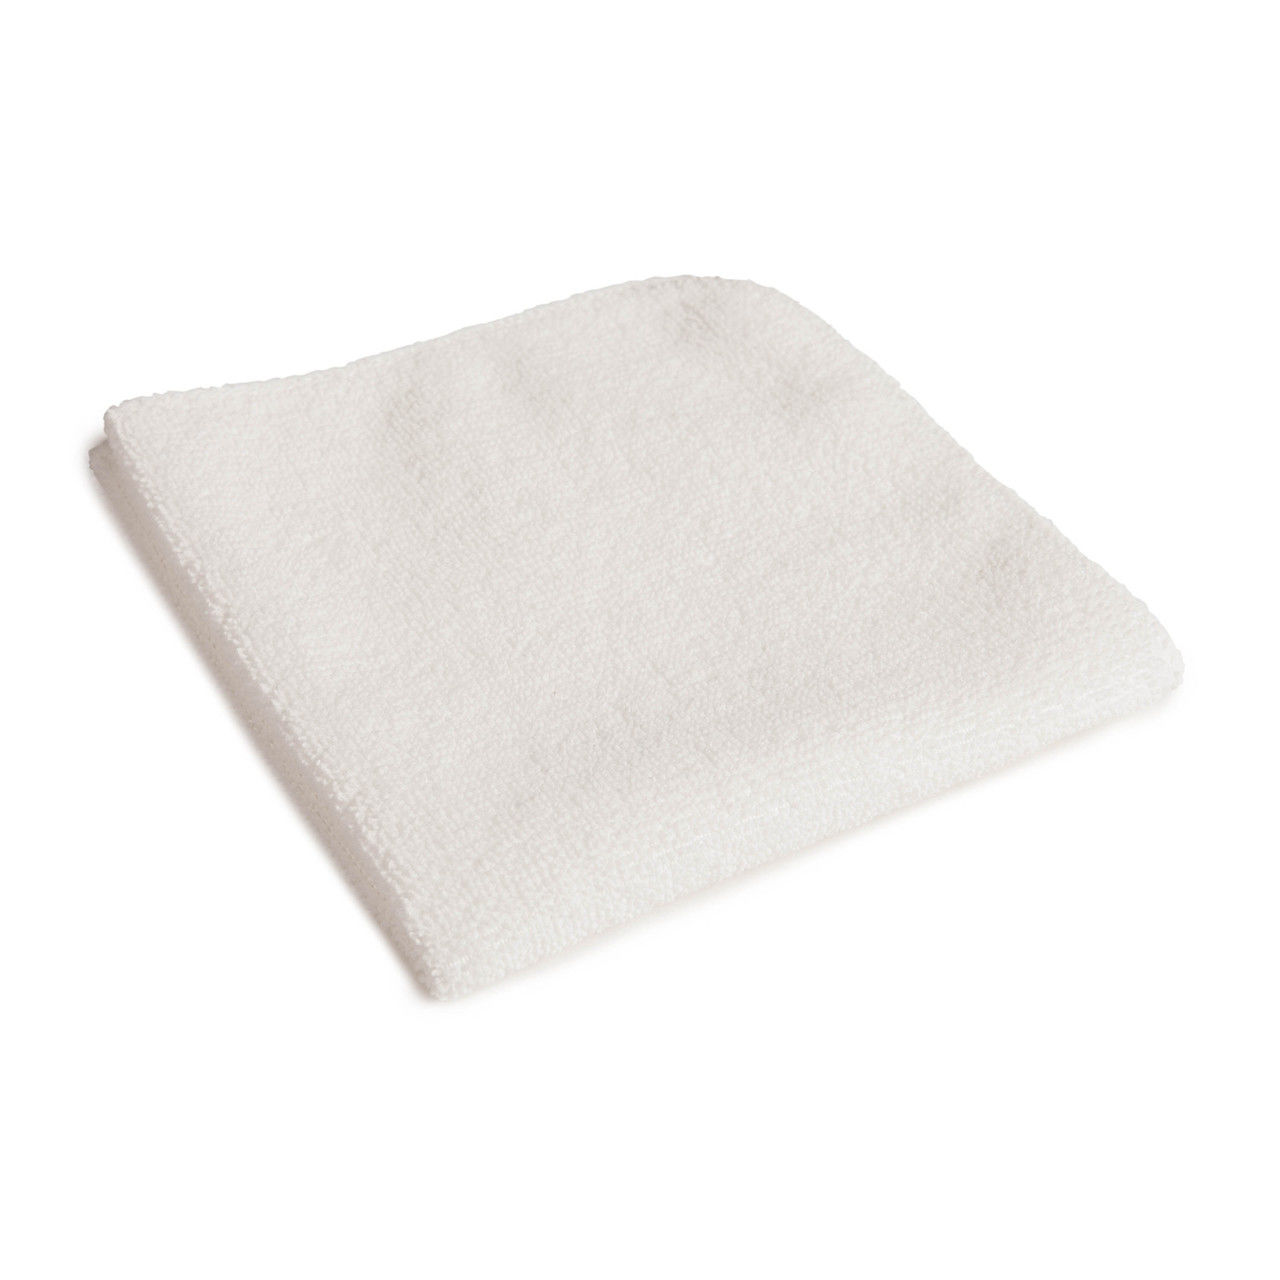 Where can I find detailed info on dairy towels' microfiber effectiveness and washing instructions?